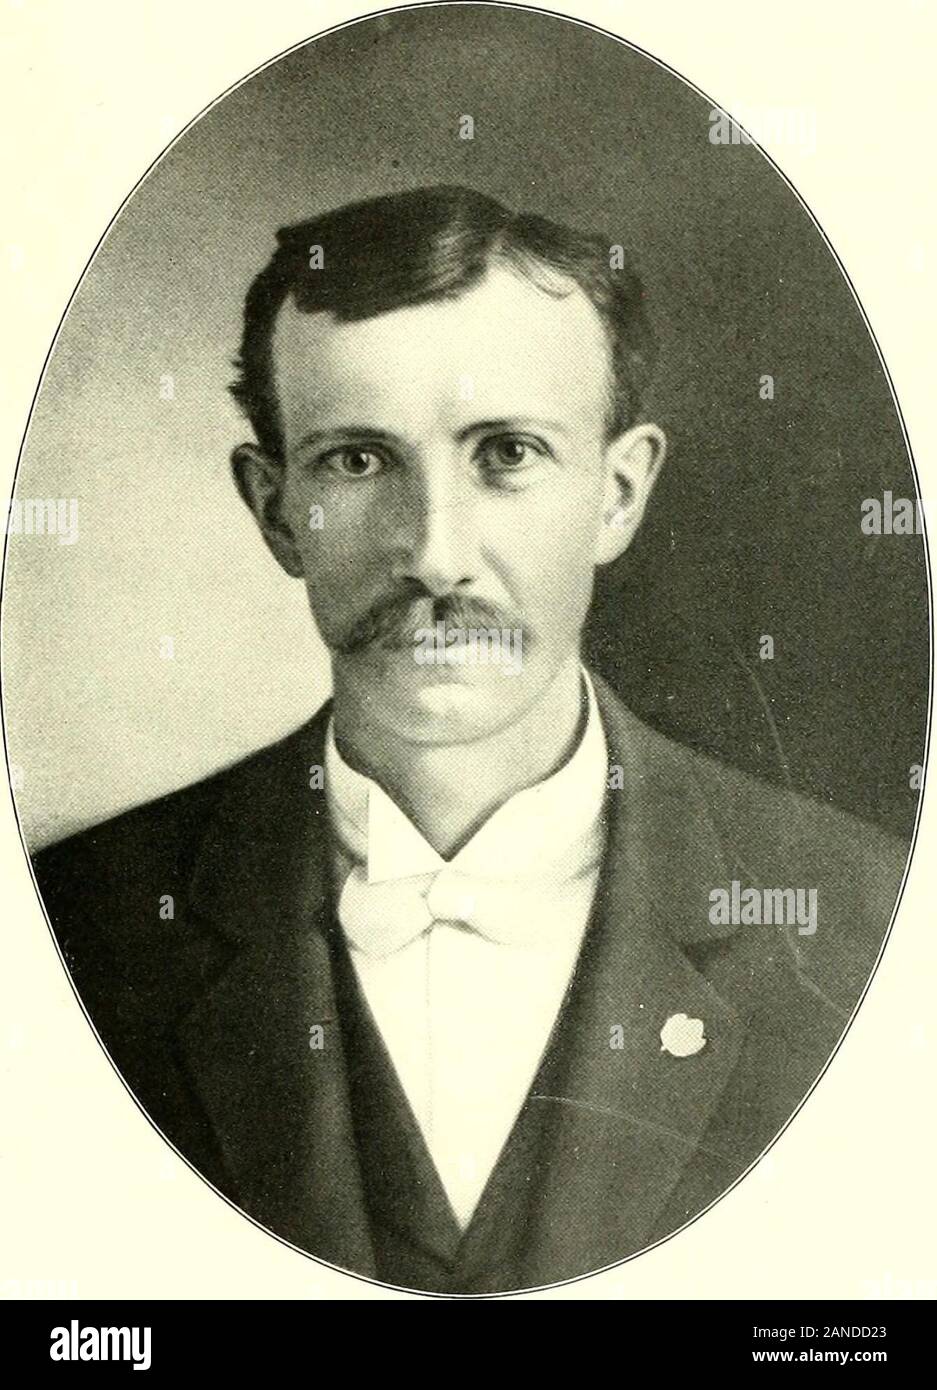 Historical encyclopedia of Illinois . cessful business man and public-spiritedcitizen, as well as a worthy representative ofone of the communitys oldest and most respectedfamilies. MORE, James H., M. D.—Most men, when castiiig alx)Ut for a vocation, are satisfied with one],rofp=sion. and in that are not always proficient.Such is not the case, however, with Dr. JamesH. More, now living retired at Polo. 111., who hasdevoted his life to the medical and the ministe-rial callings, has accounted for himself well ineach, and has still found more time to give topublic life .111.1 till- duties (if riti Stock Photo